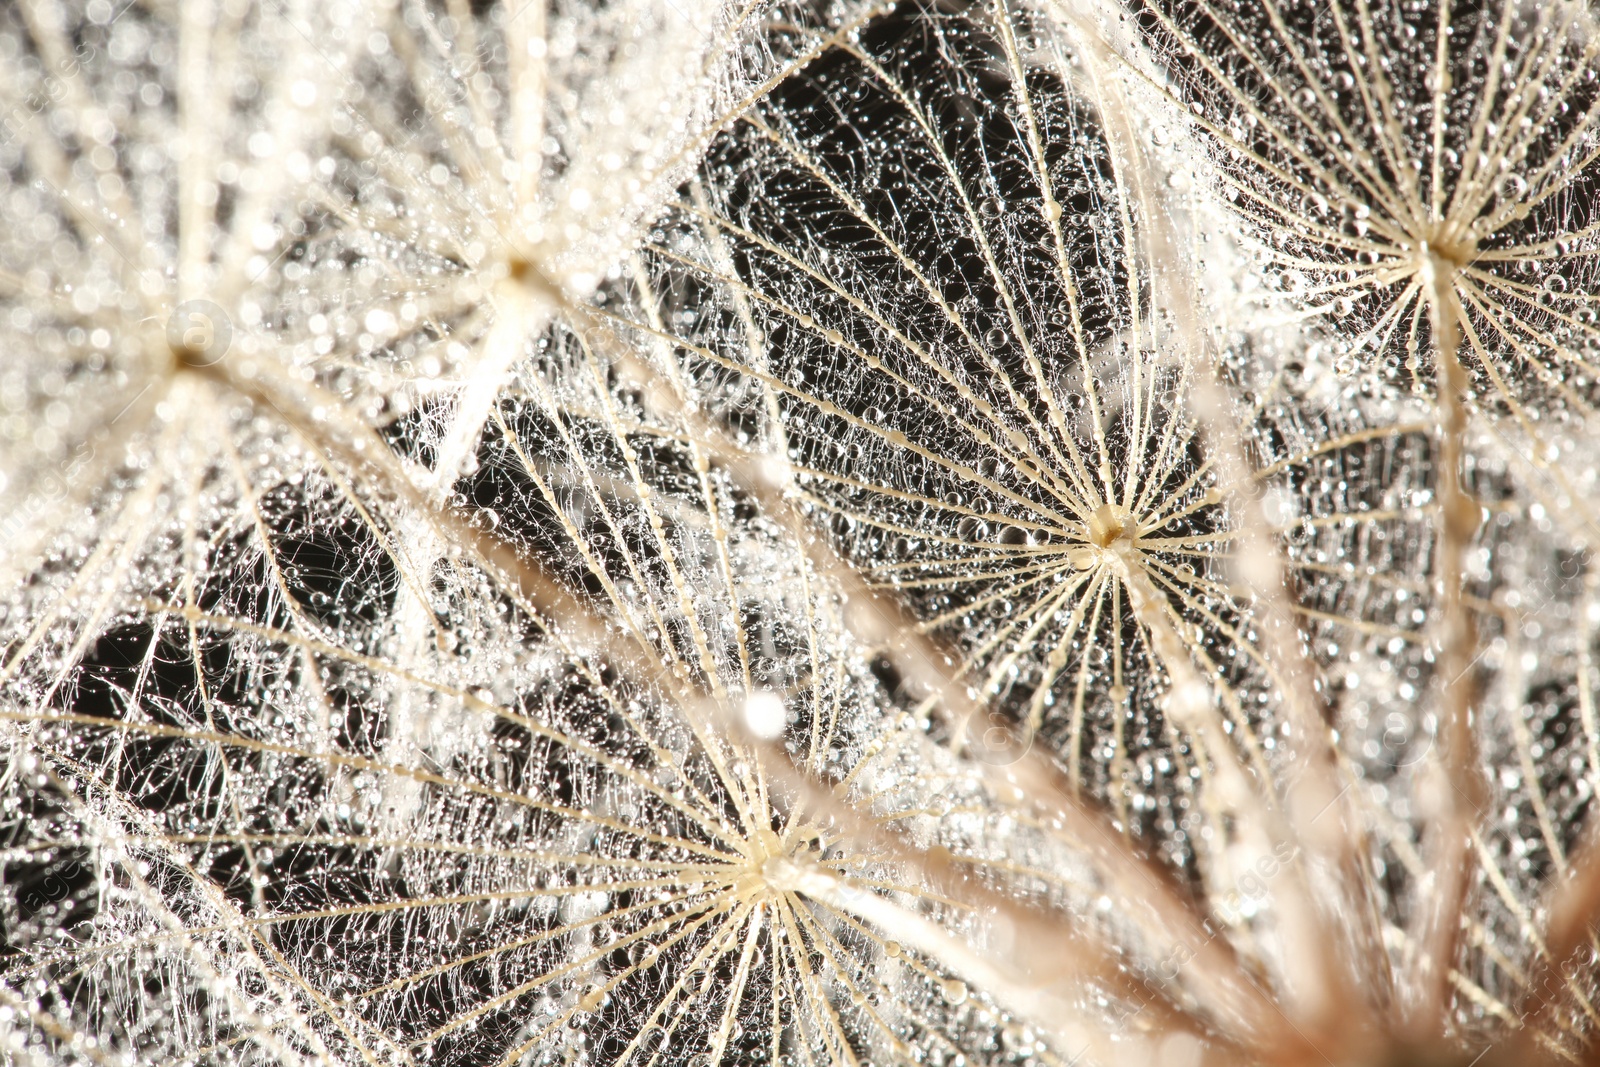 Photo of Dandelion seeds with dew drops on black background, close up